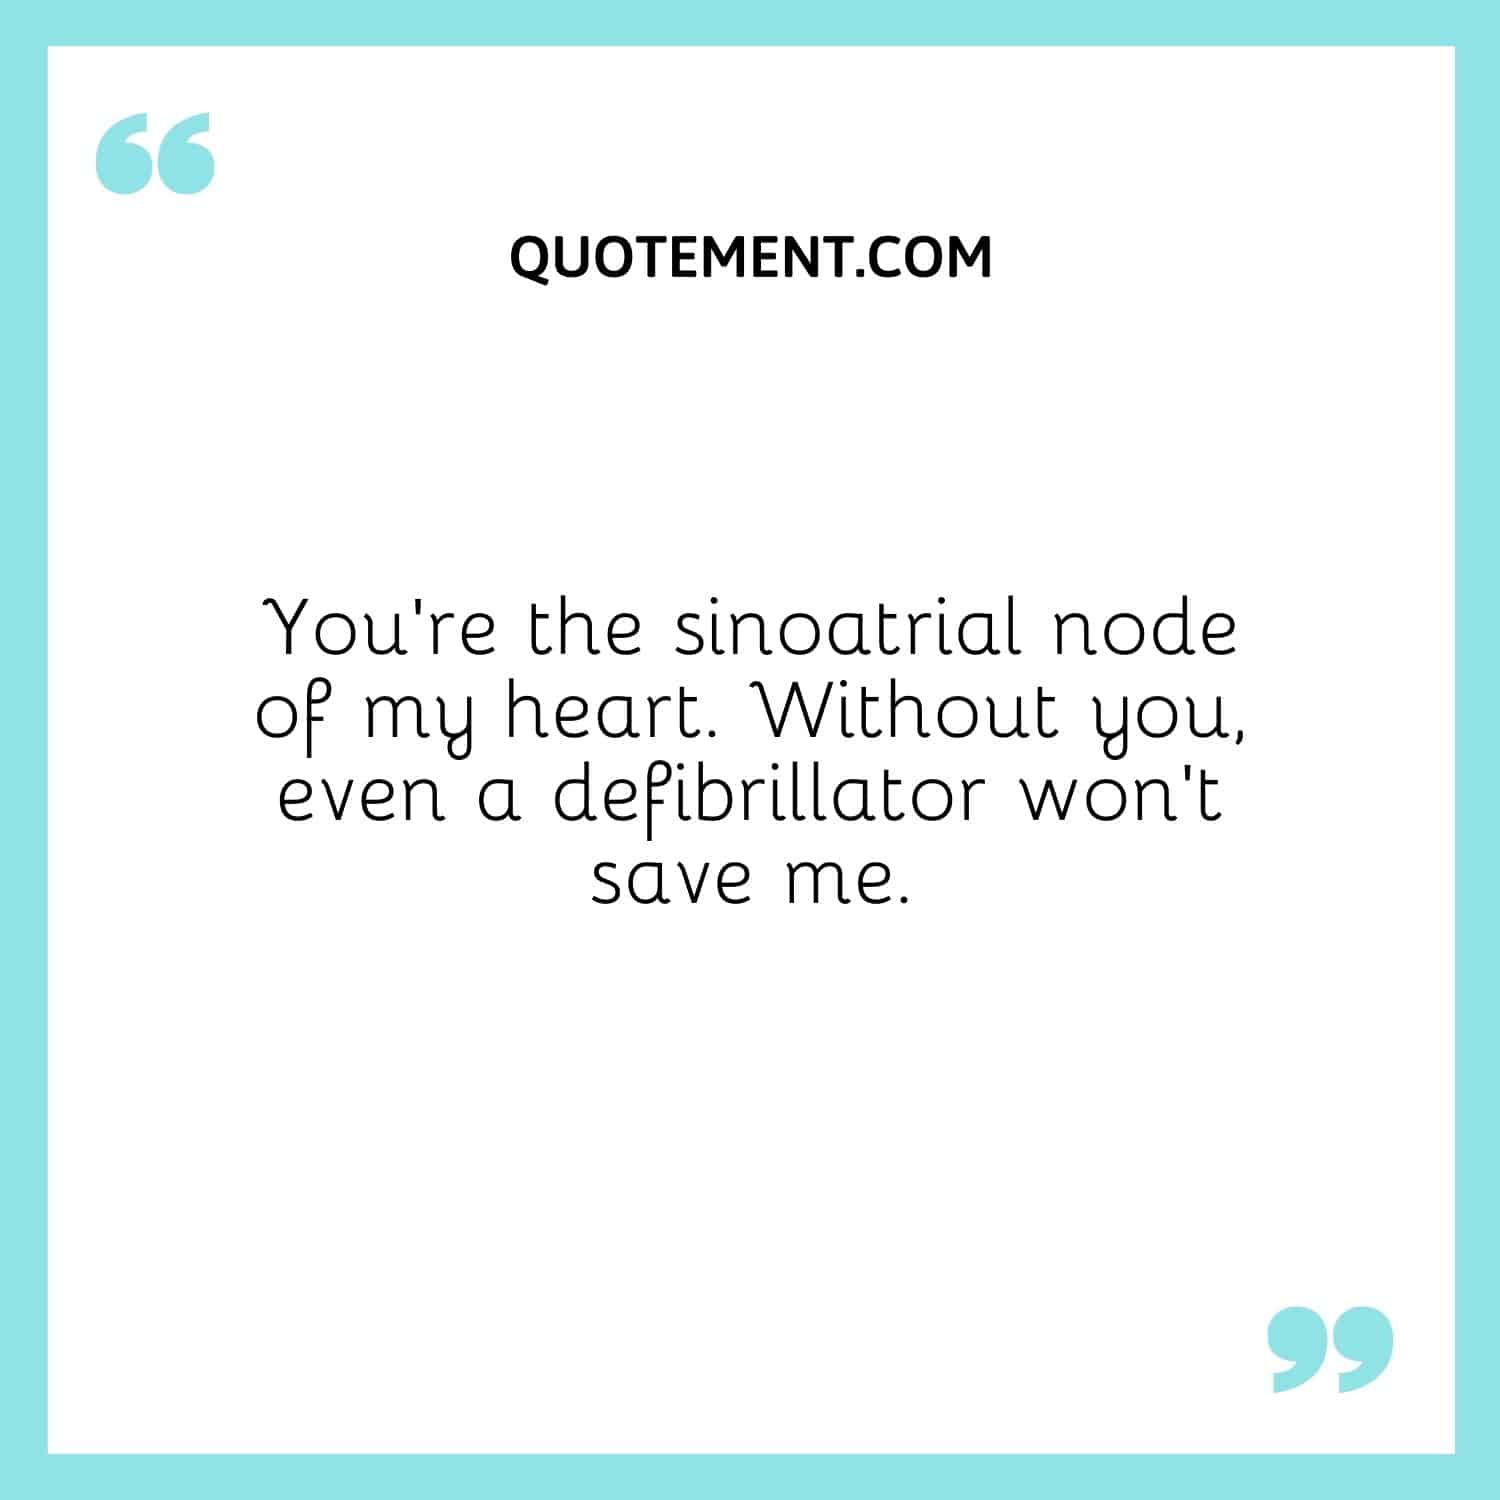 You’re the sinoatrial node of my heart. Without you, even a defibrillator won’t save me.